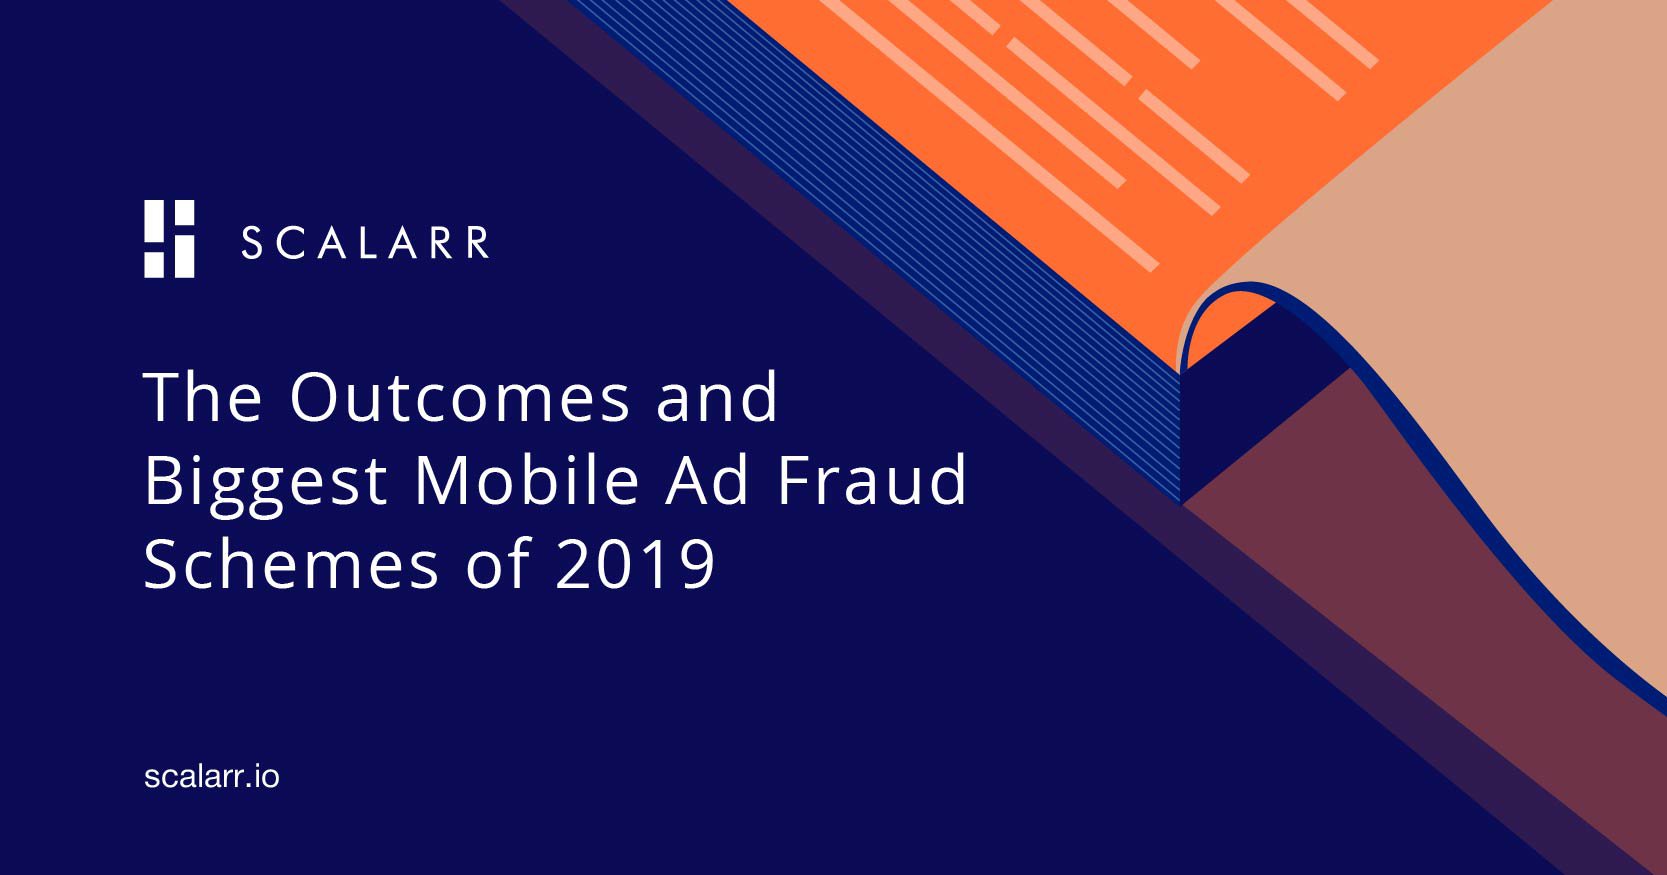 The Outcomes and Biggest Mobile Ad Fraud Schemes of 2019